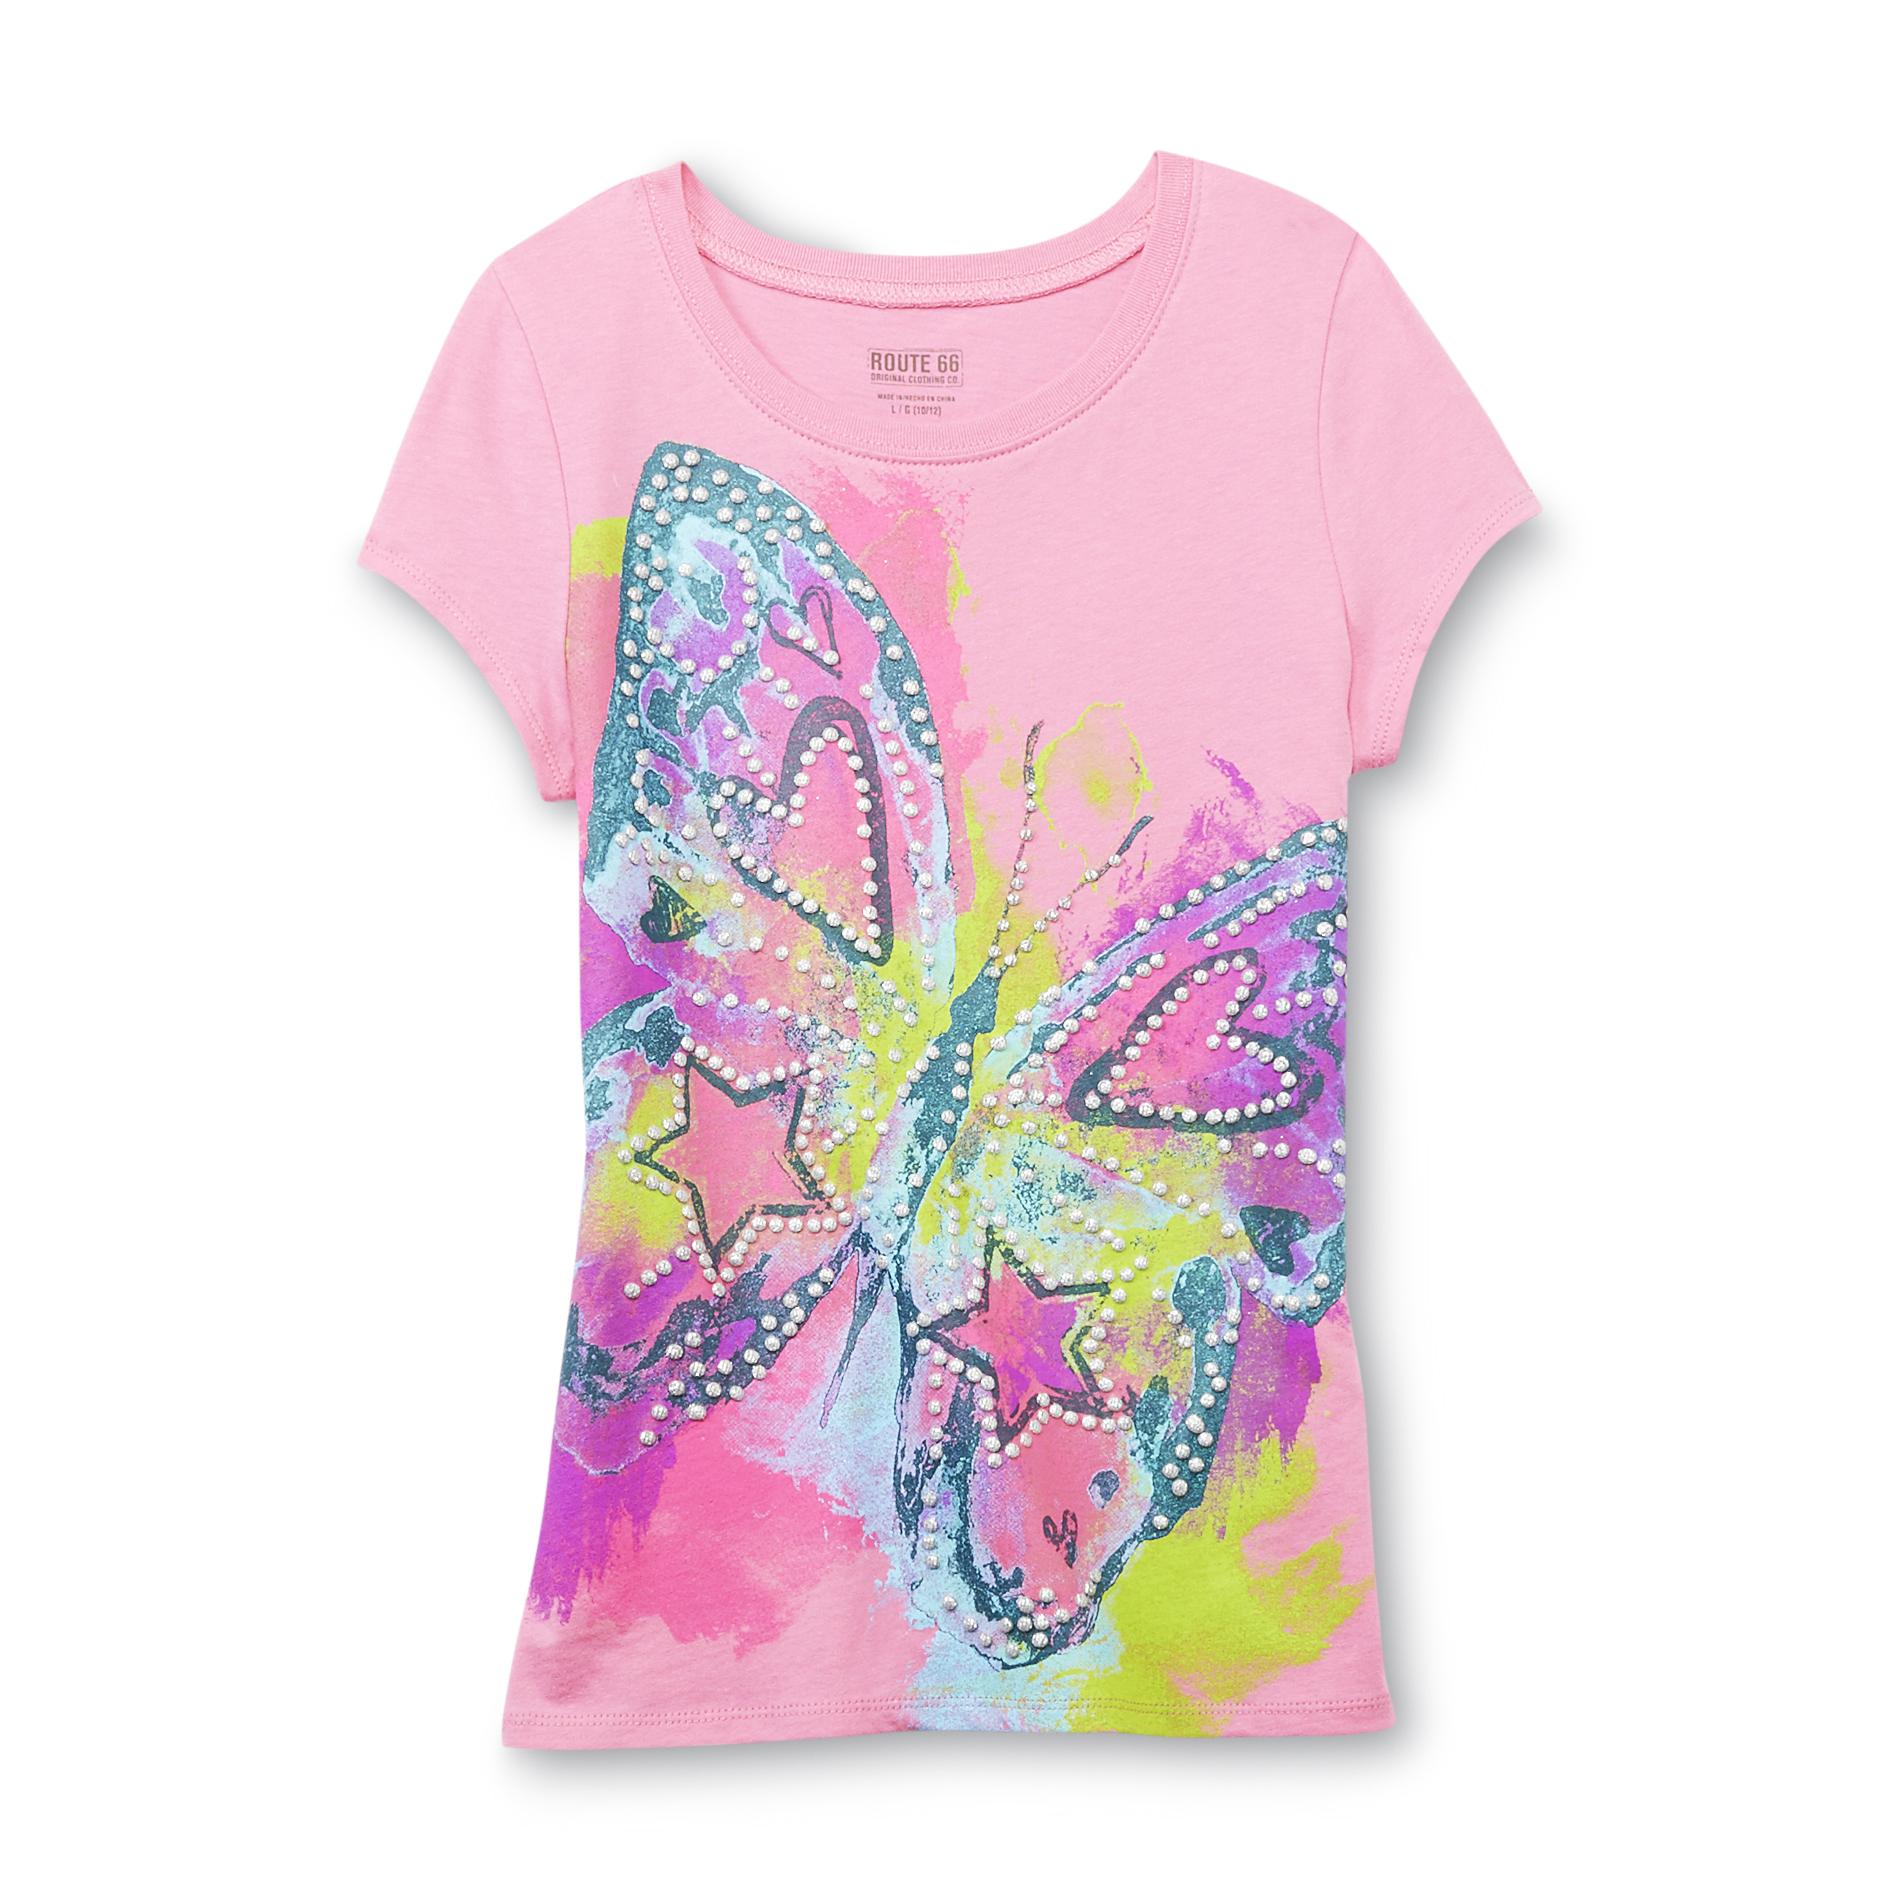 Route 66 Girl's Graphic T-Shirt - Butterfly